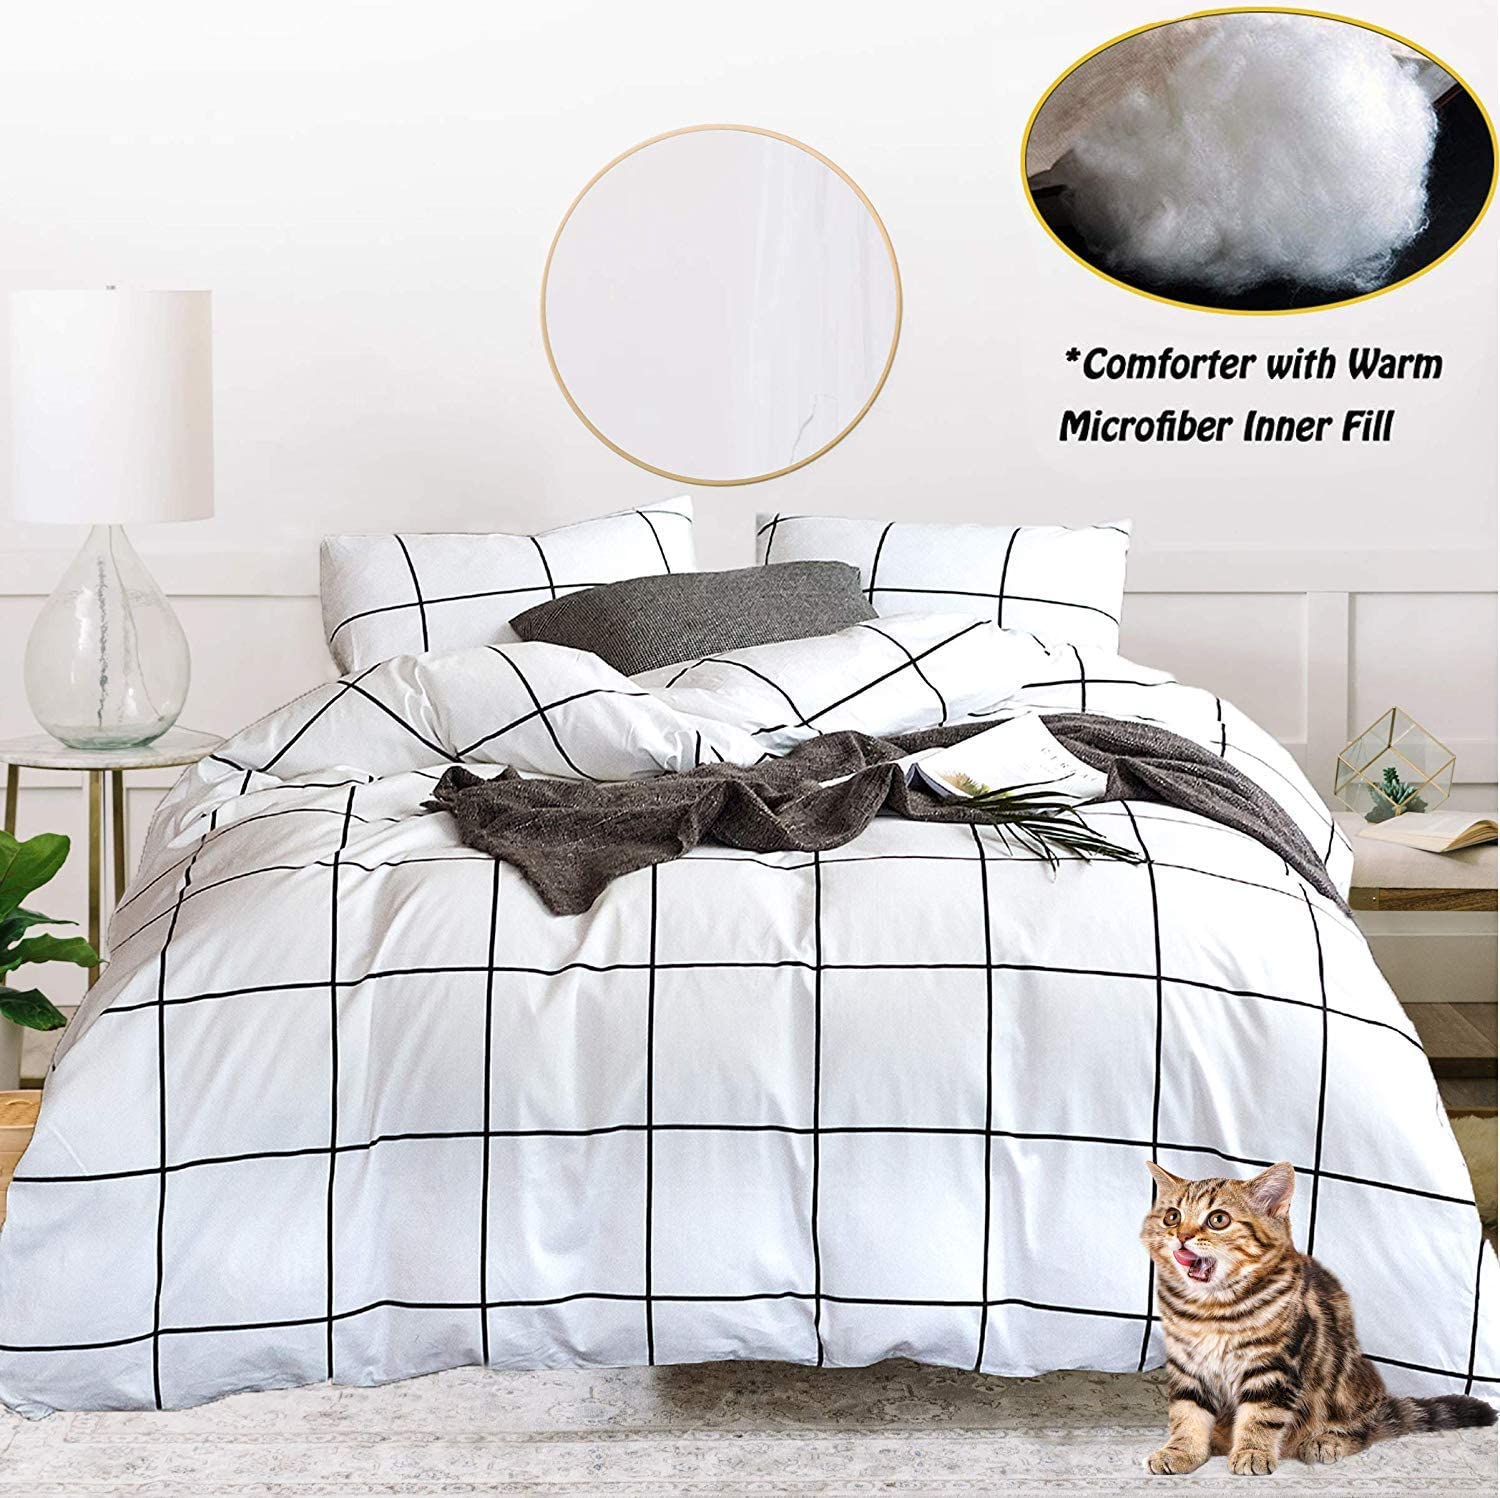 Full Plaid Bedding Duvet Cover Queen Soft Cotton Children Full Queen Comforter Cover Blue Grids Bedding Sets Queen for Kids Boys Teens Modern Geometric Gray Plaid Bedding Collection Queen 3 Pieces 